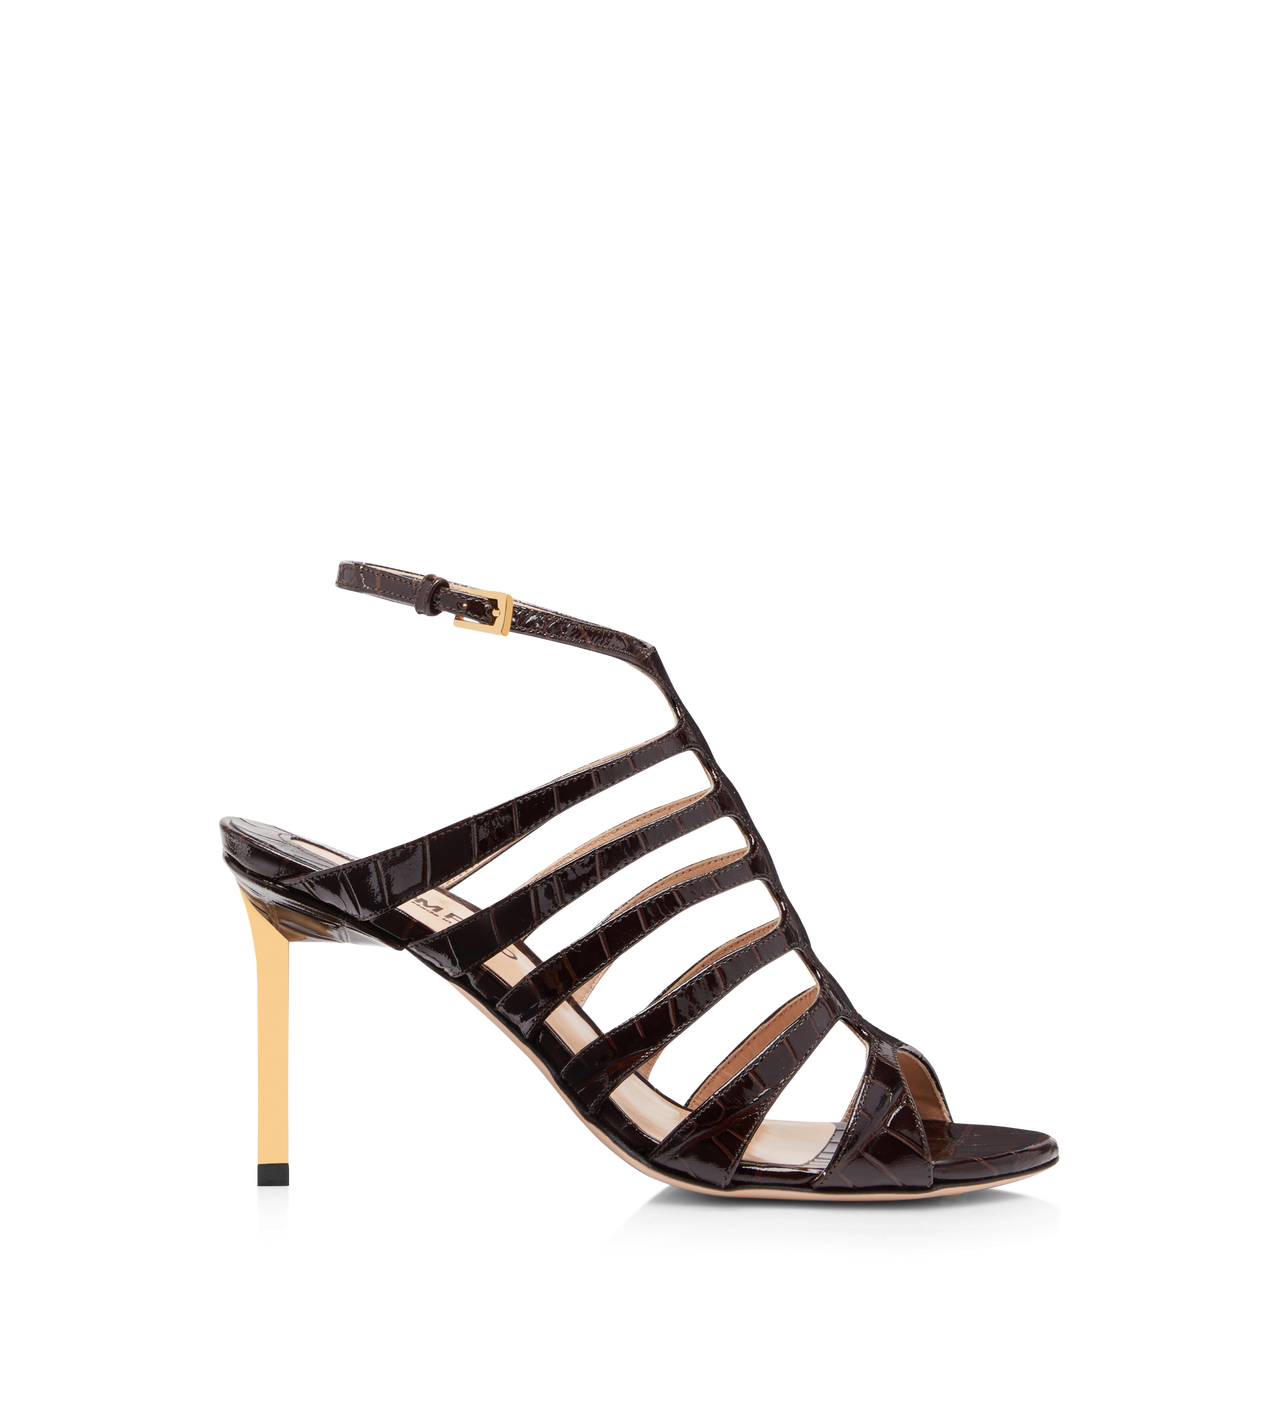 GLOSSY STAMPED CROC LEATHER CARINE SANDAL image number 0